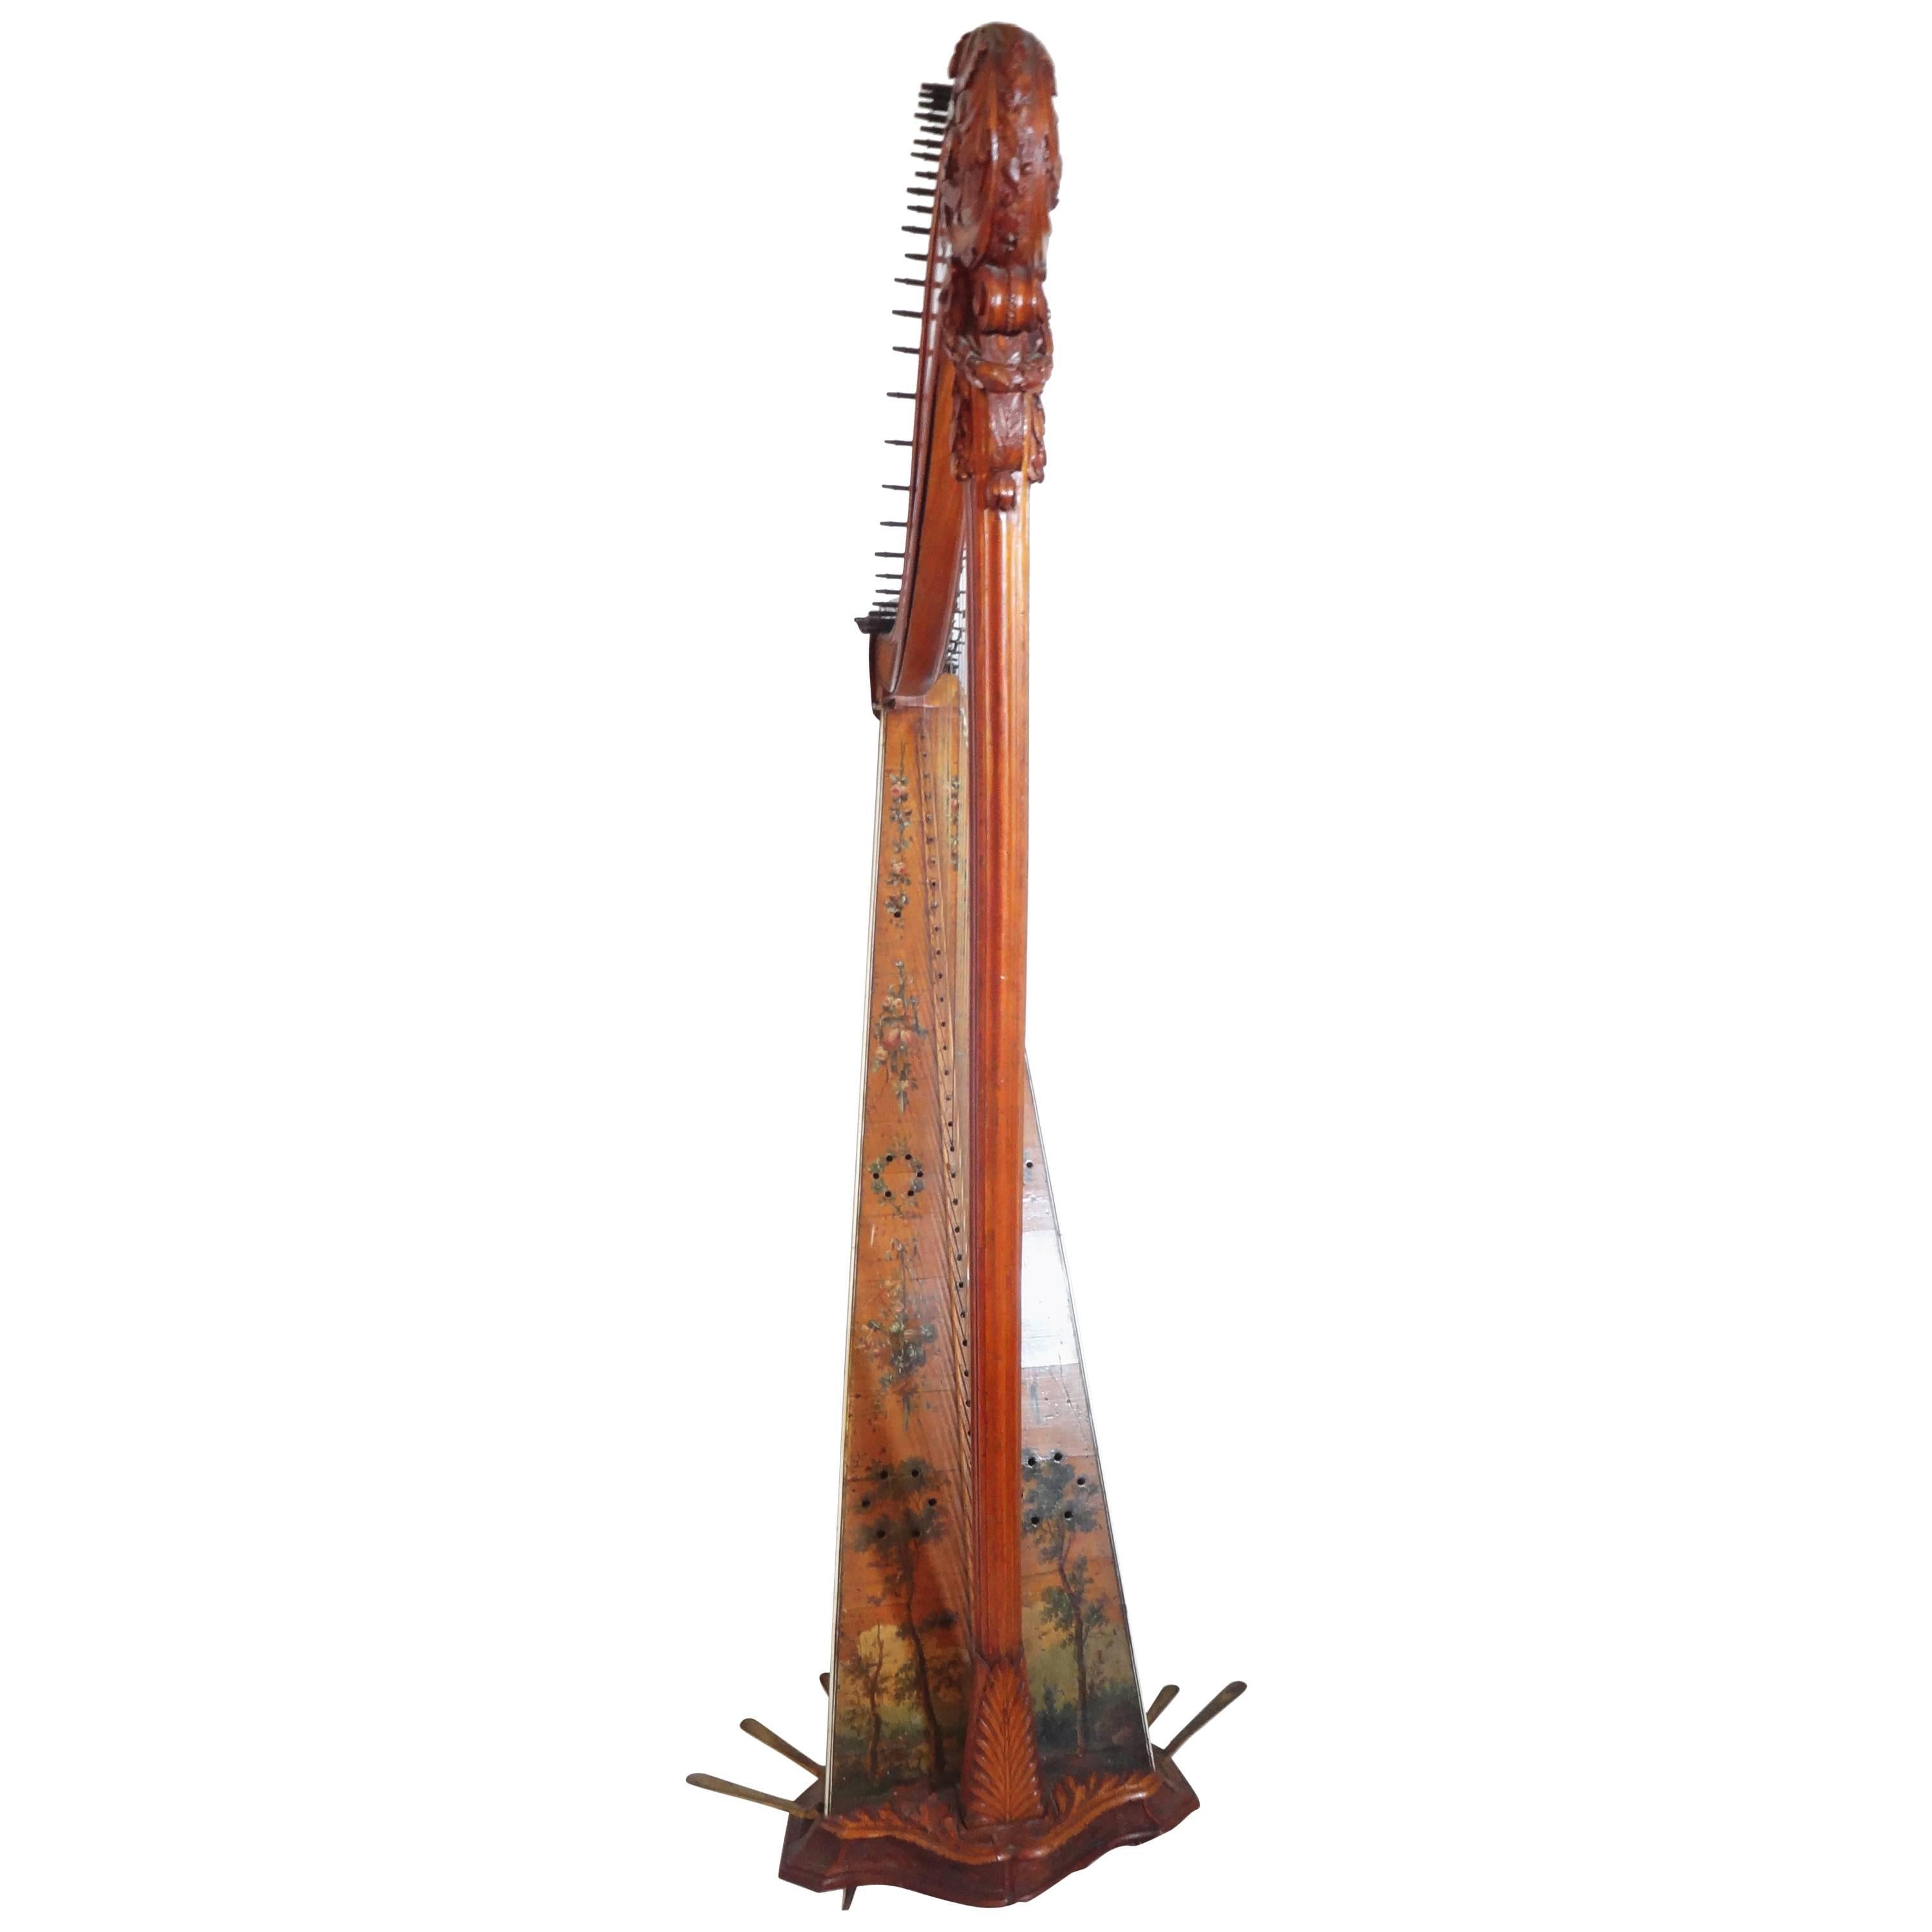 Rare Harp, 18th Century, Wood Painted with Flowers, Landscape, France